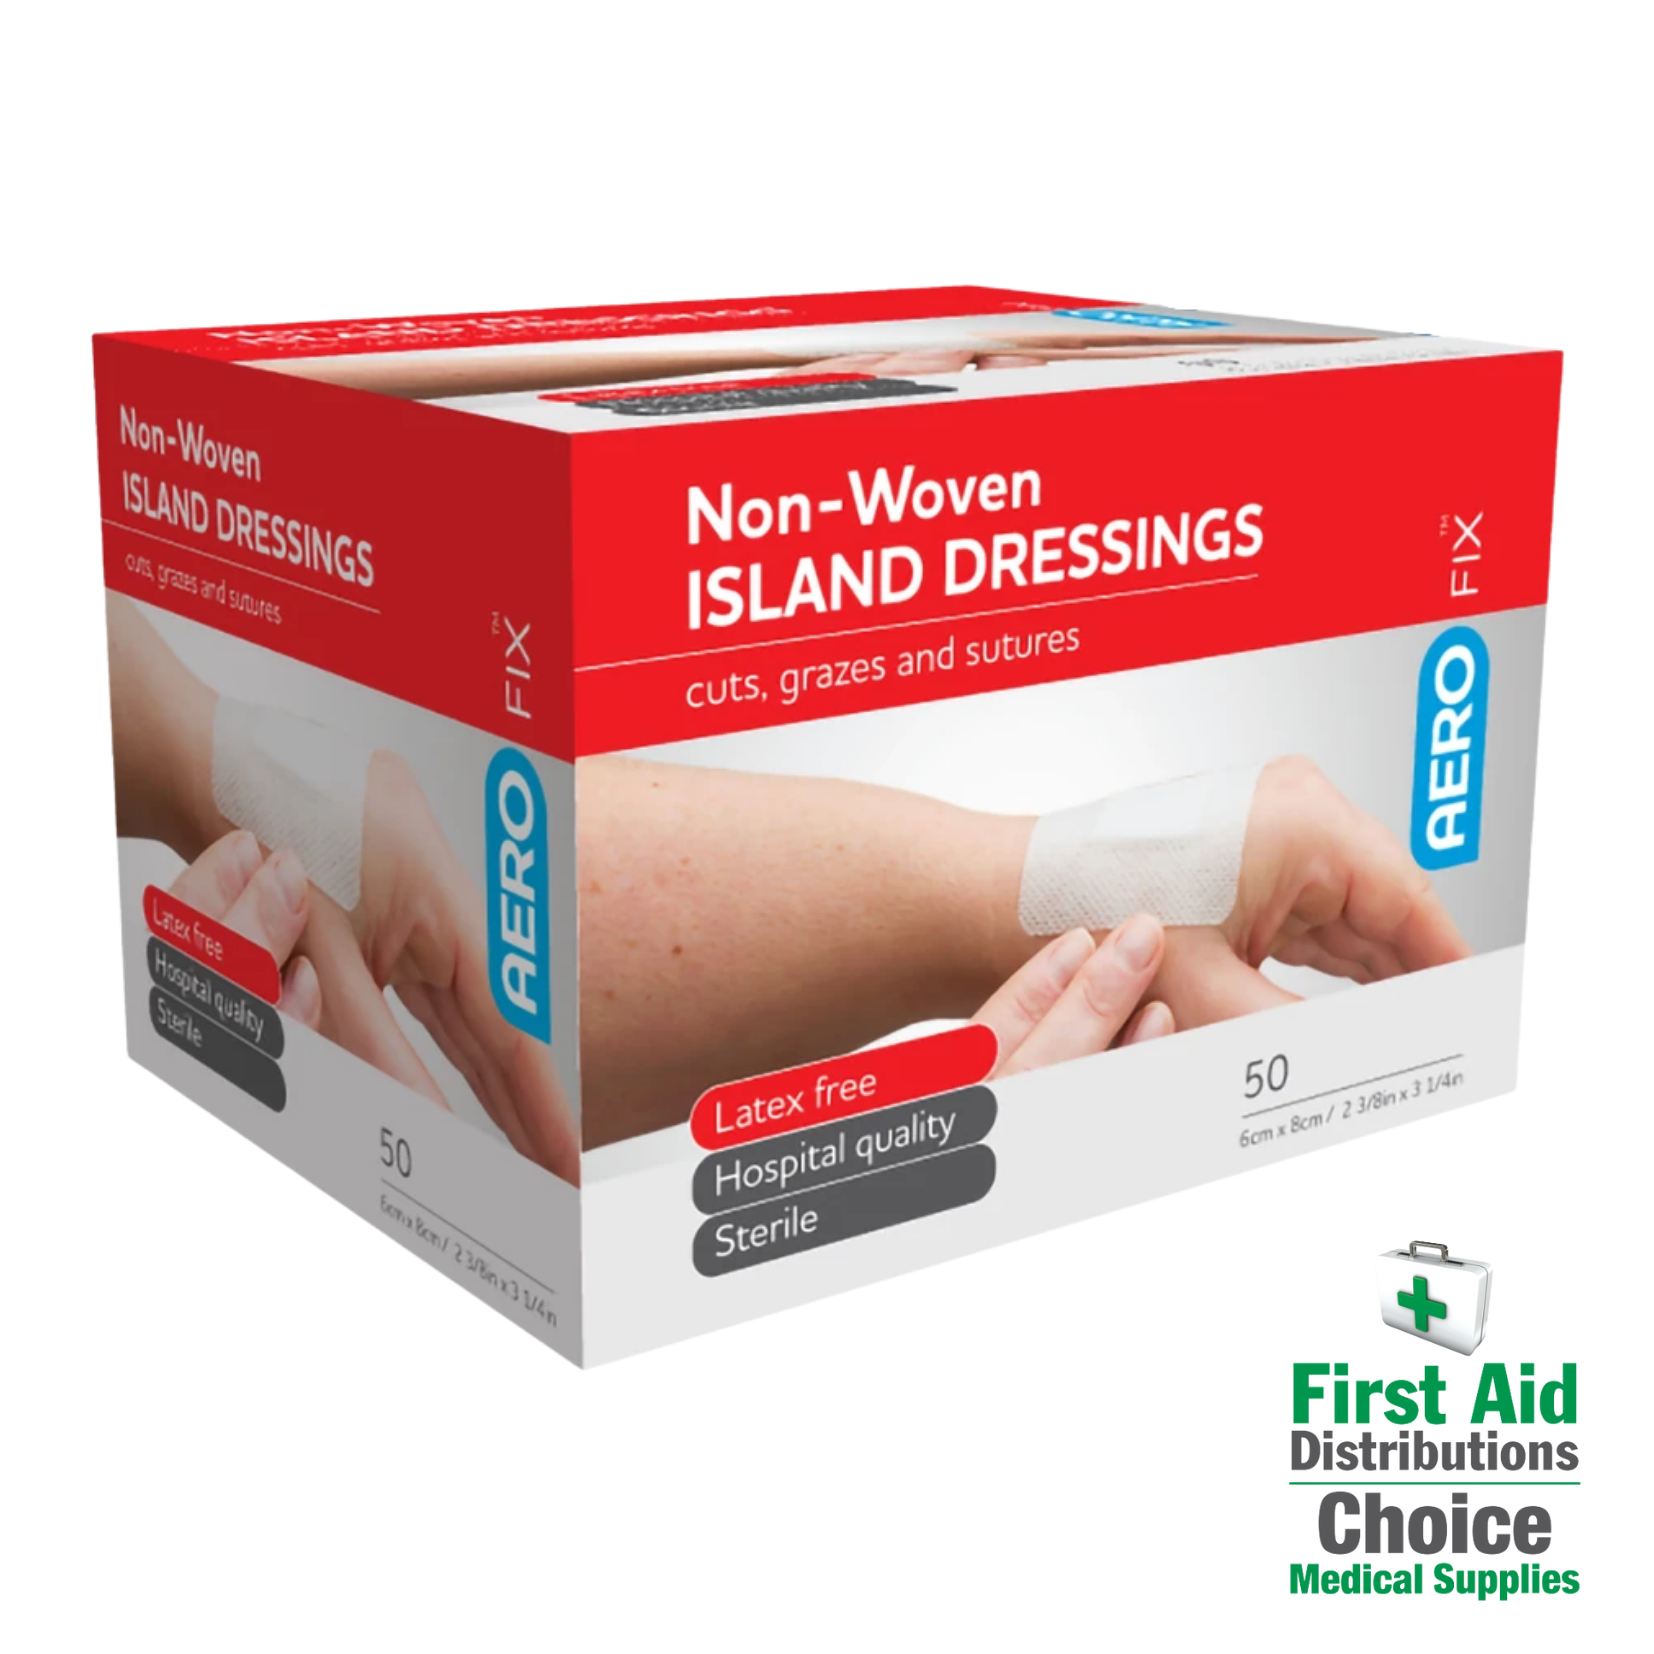 collections/Non_Woven_Island_Dressing_Aero_6cmx8cm_Box_First_Aid_Distributions.png